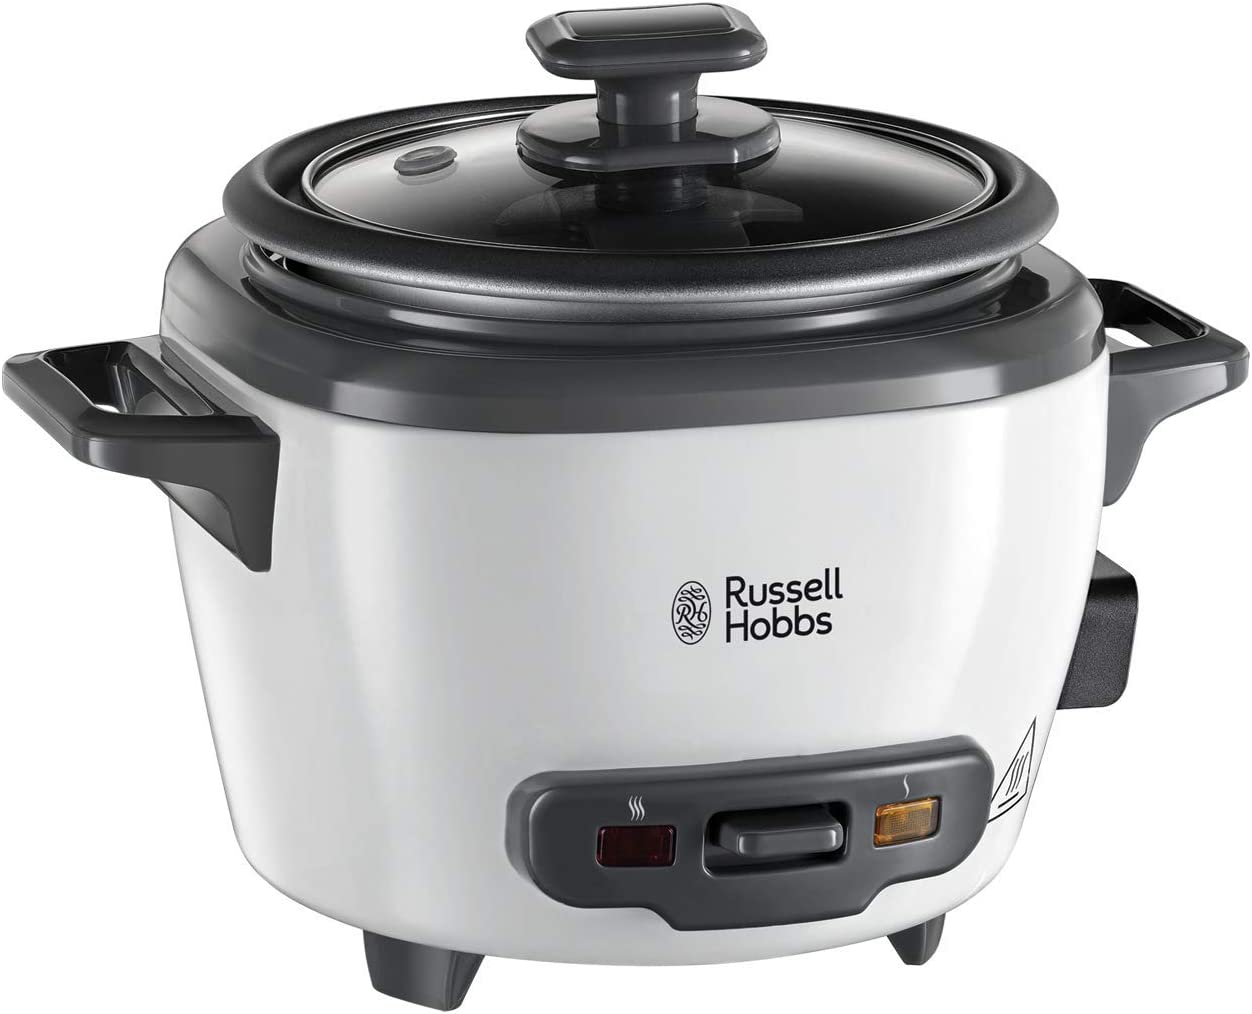 Russell Hobbs 27020-56 0.4 liter mini rice cooker, keep warm, removable non-stick bowl